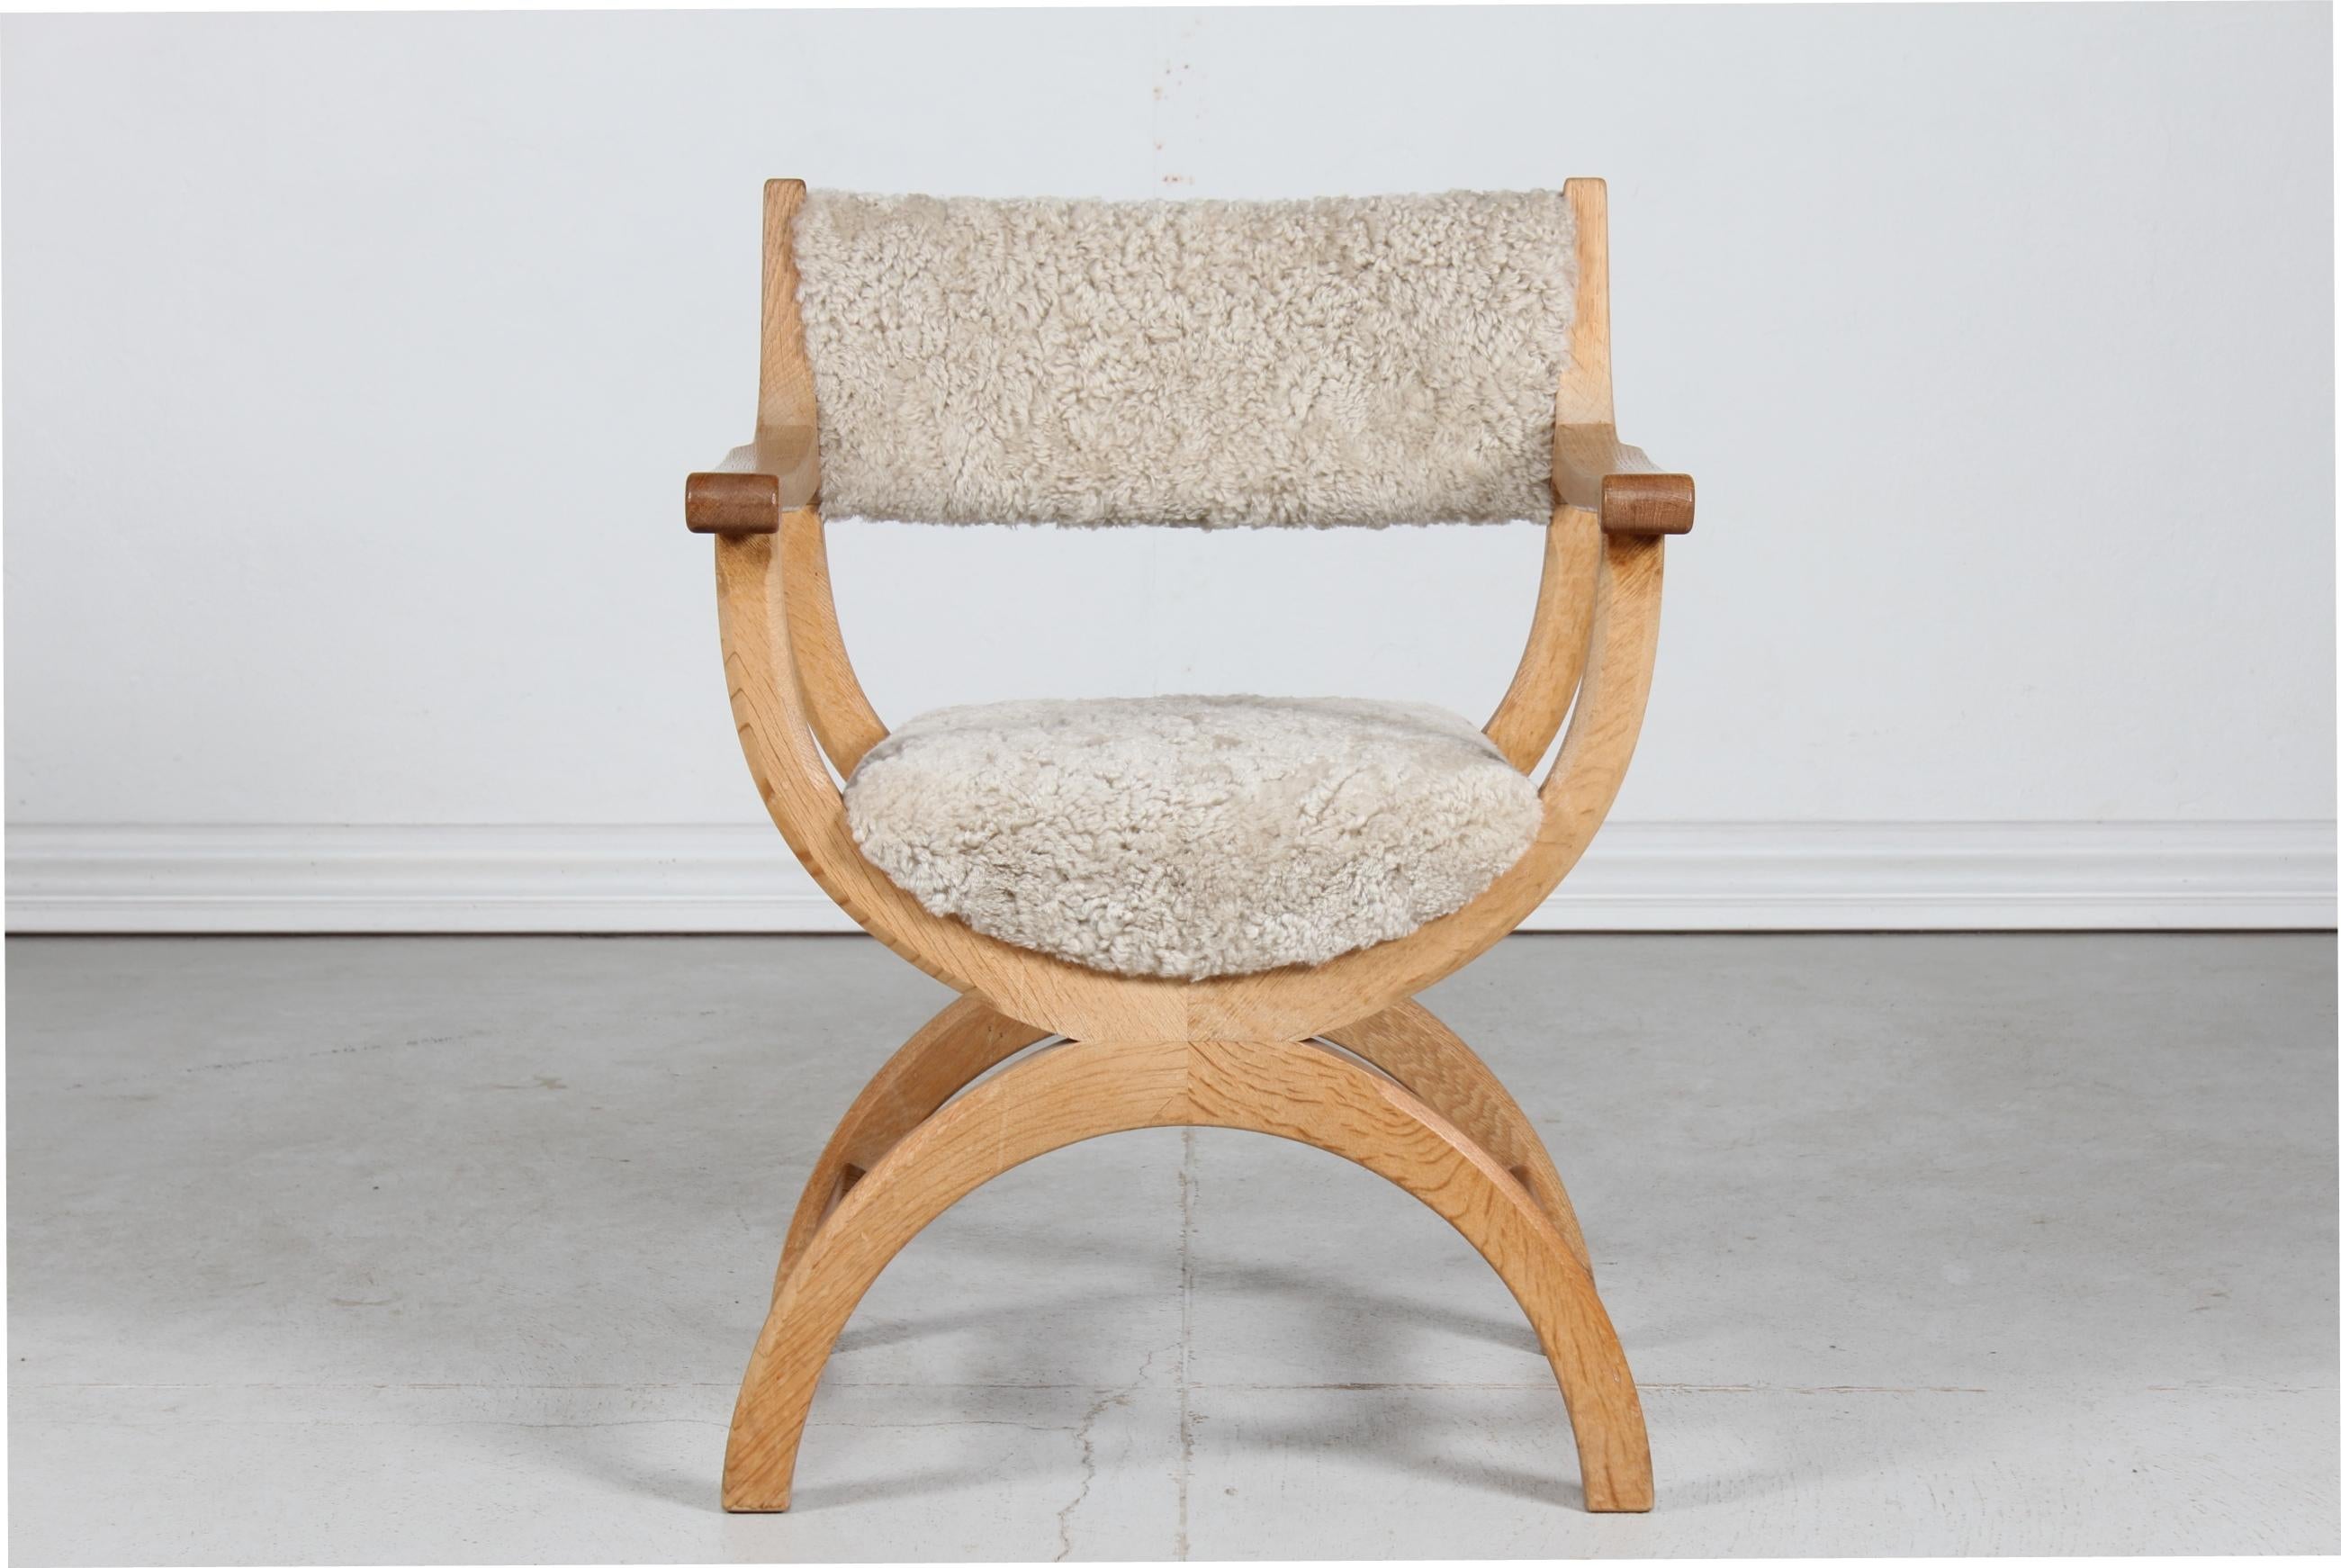 Danish vintage Henning Kjærnulf kurul chair and armchair manufactured by EG Møbler in Denmark

The chair is made of solid oak upholstered with new sheepskin which is very comfortable and hyggeligt to sit on.

Very nice vintage condition with gentle